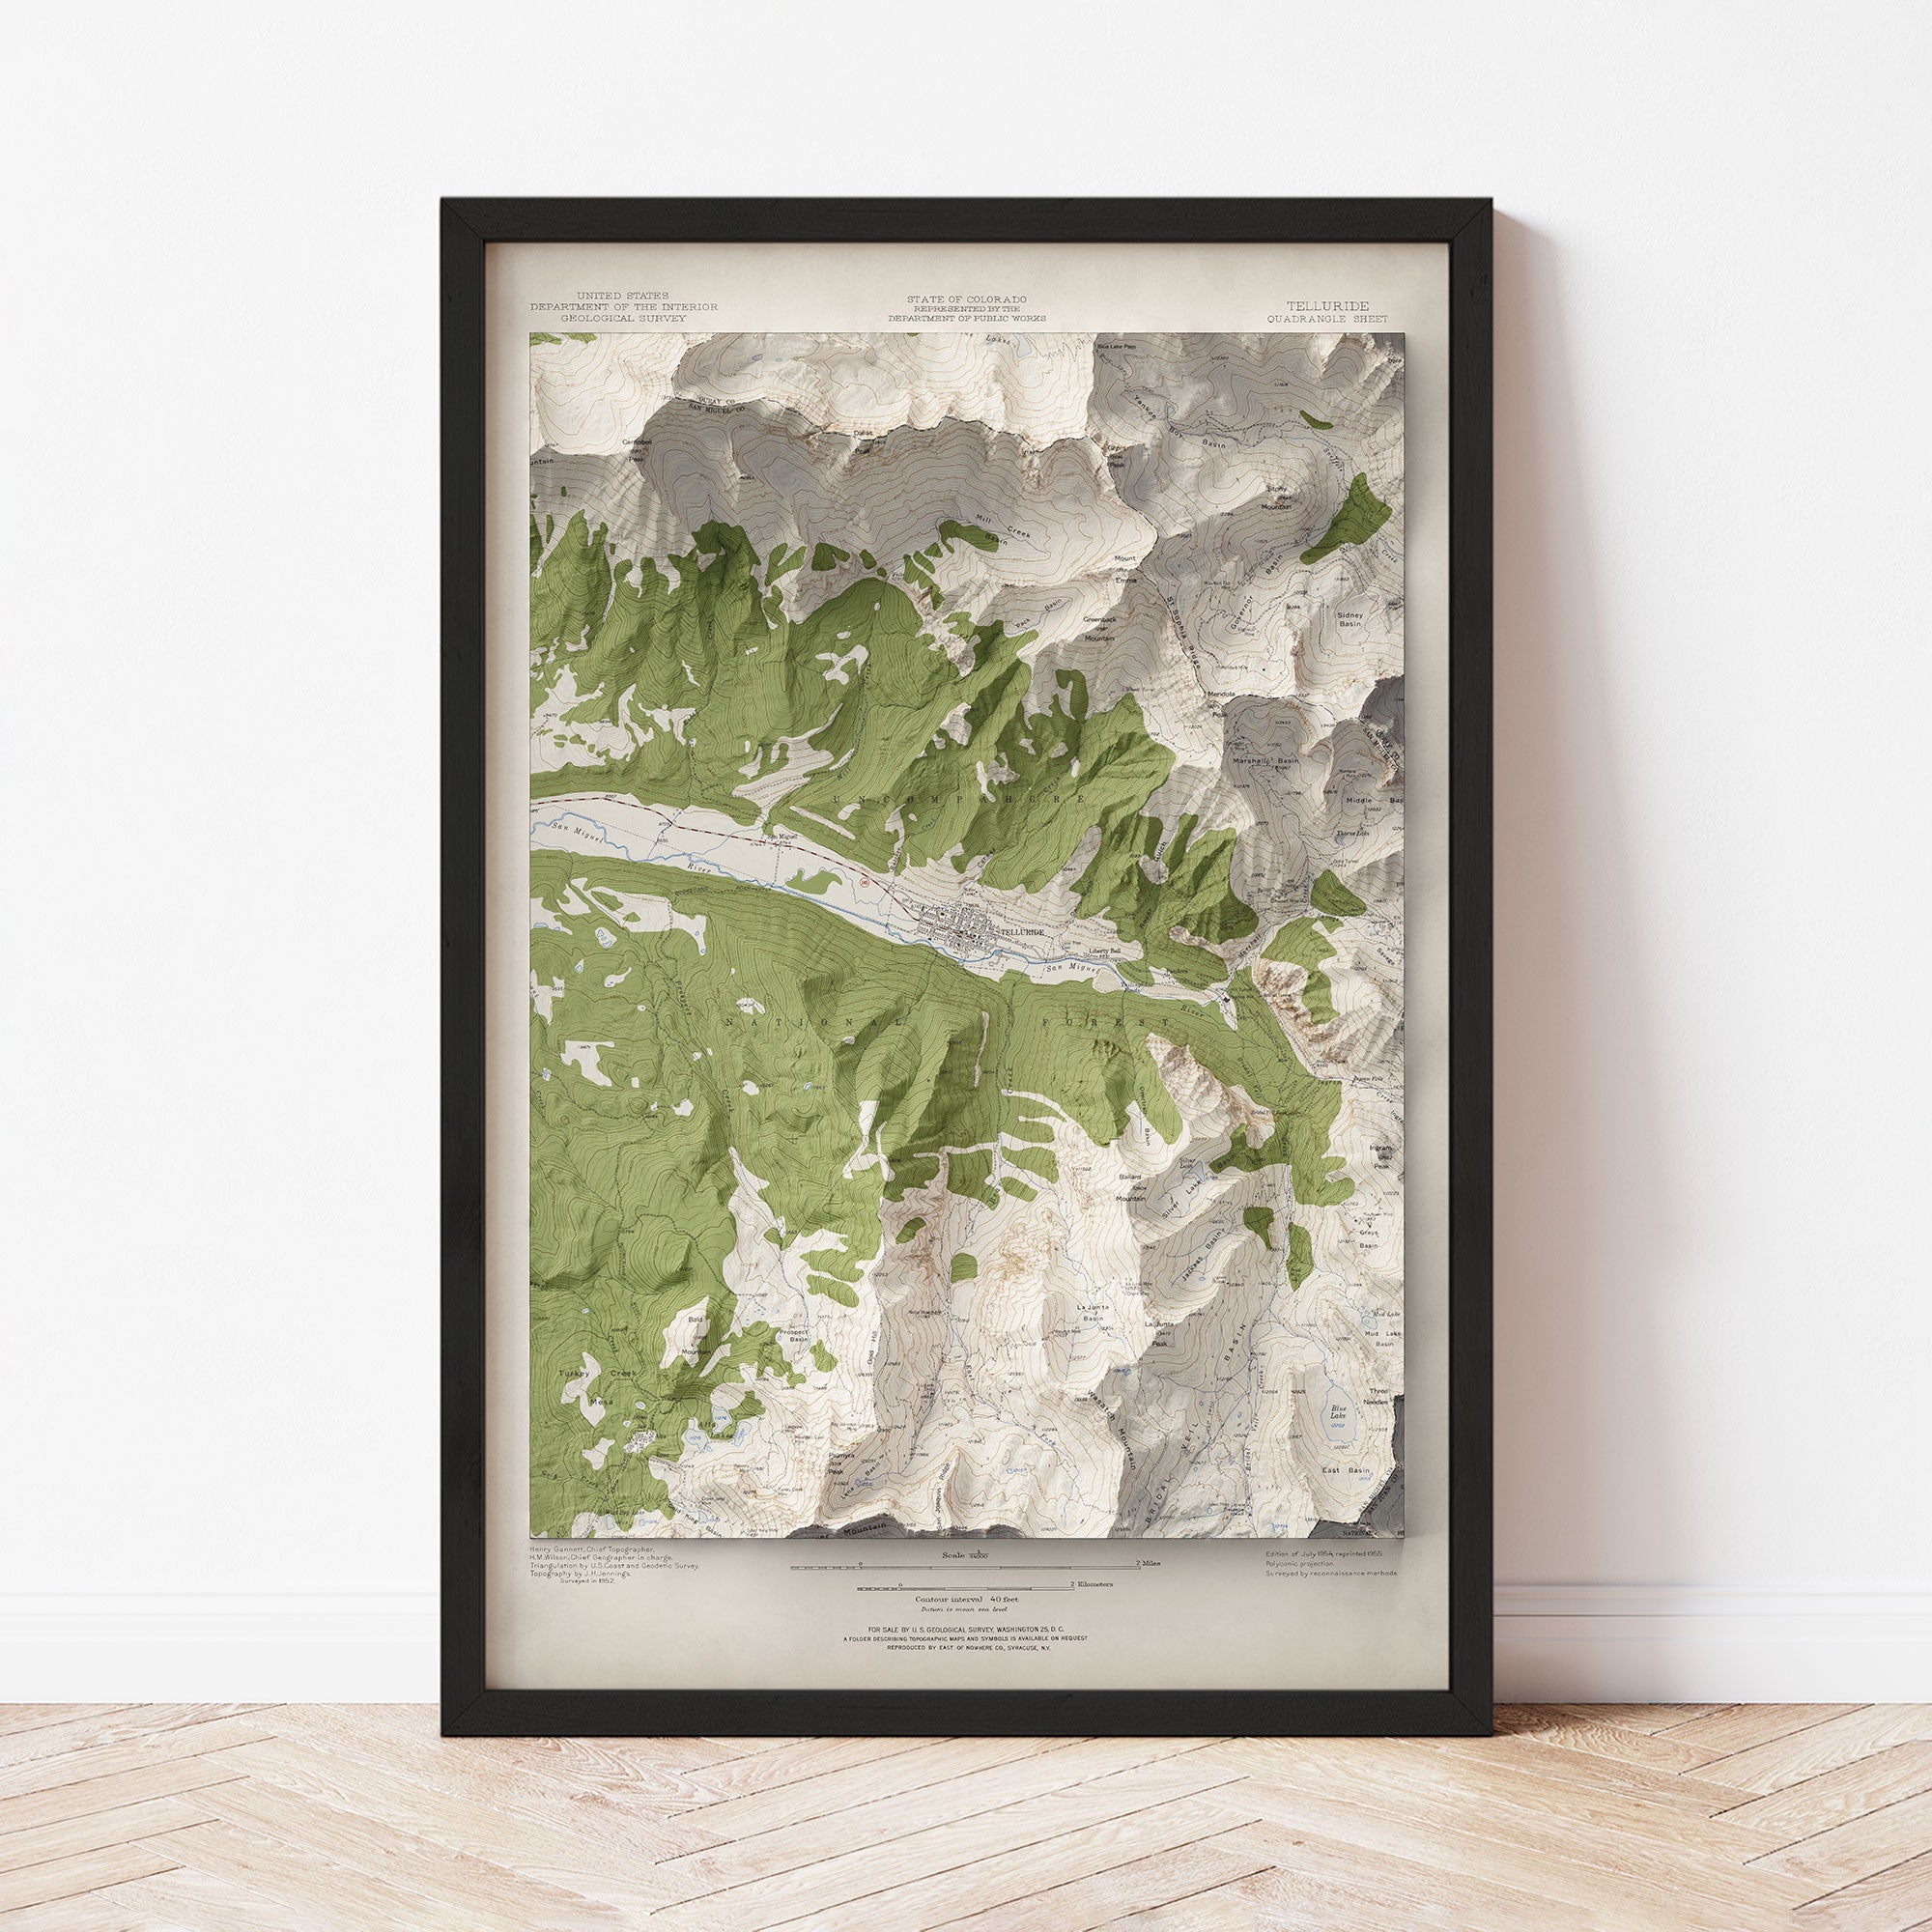 Telluride - Vintage Shaded Relief Map (1954)